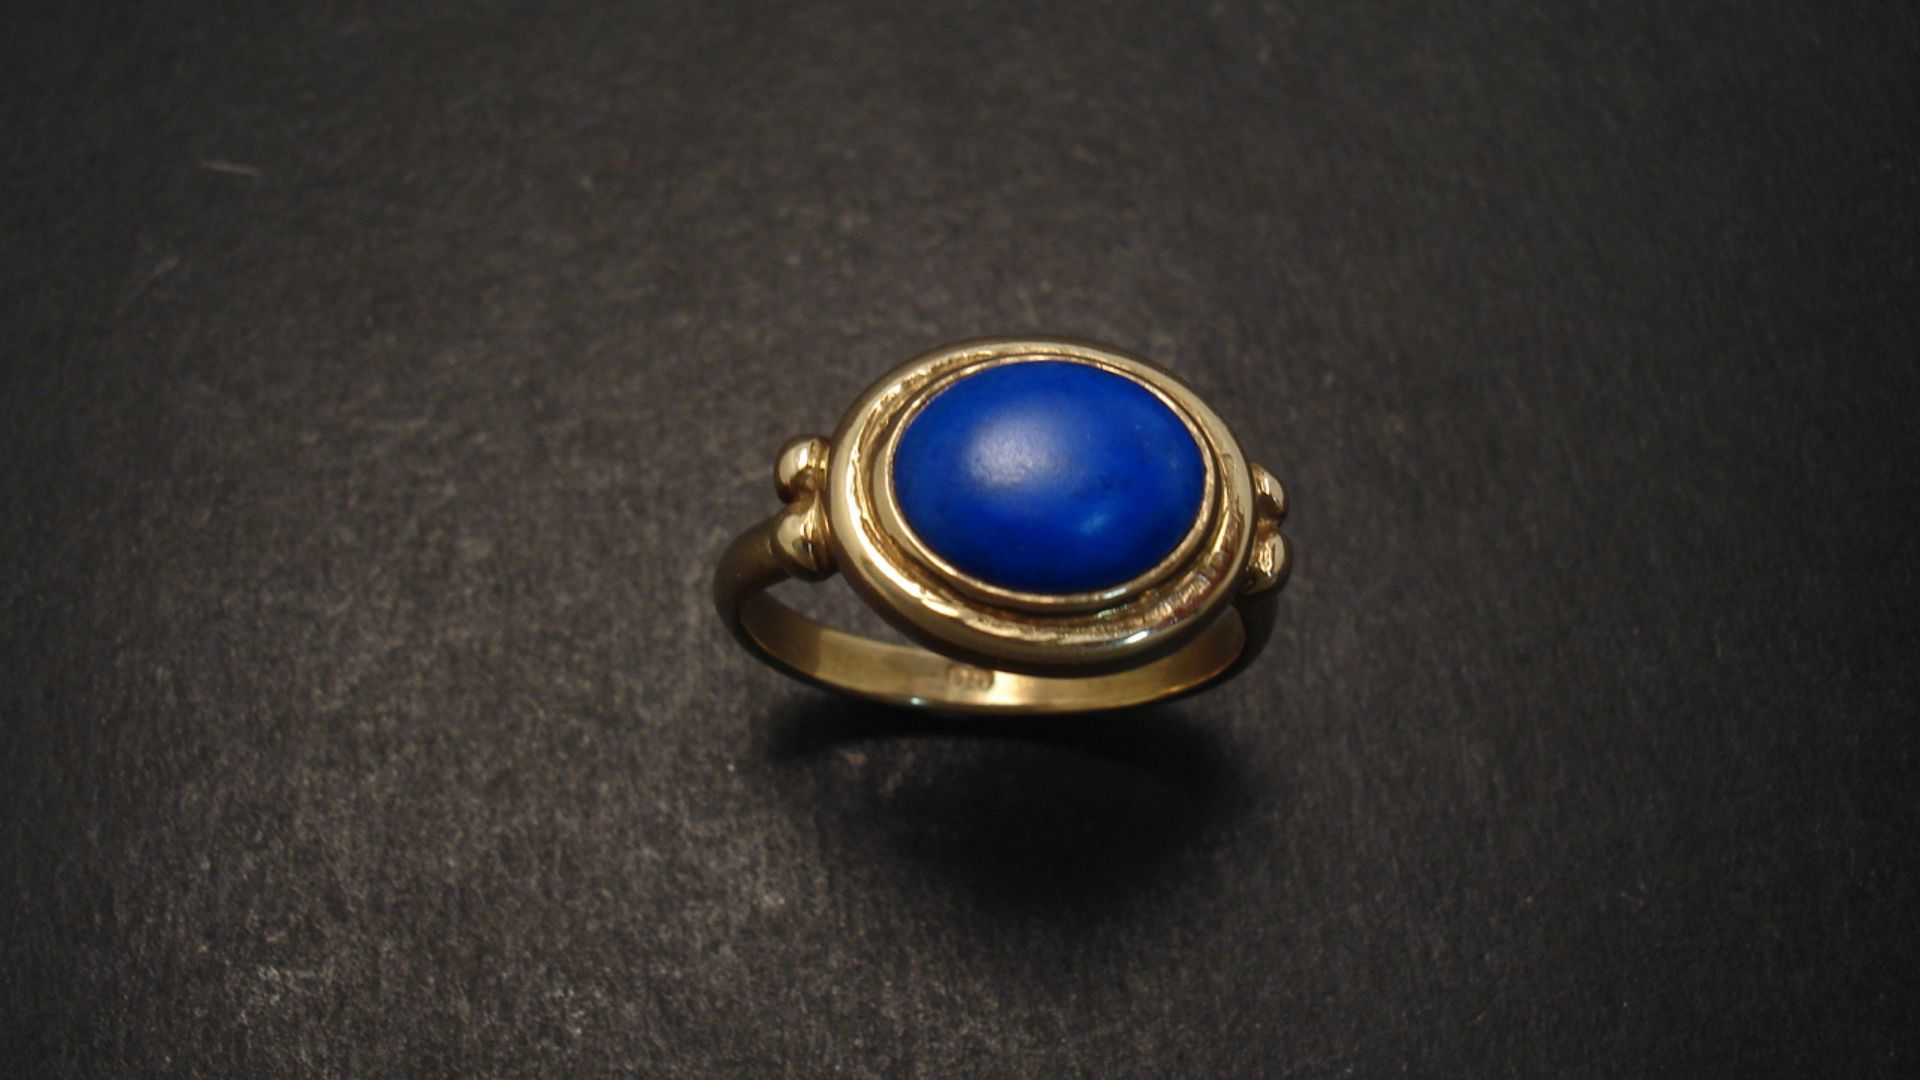 A Blue Stone Ring With Black Background